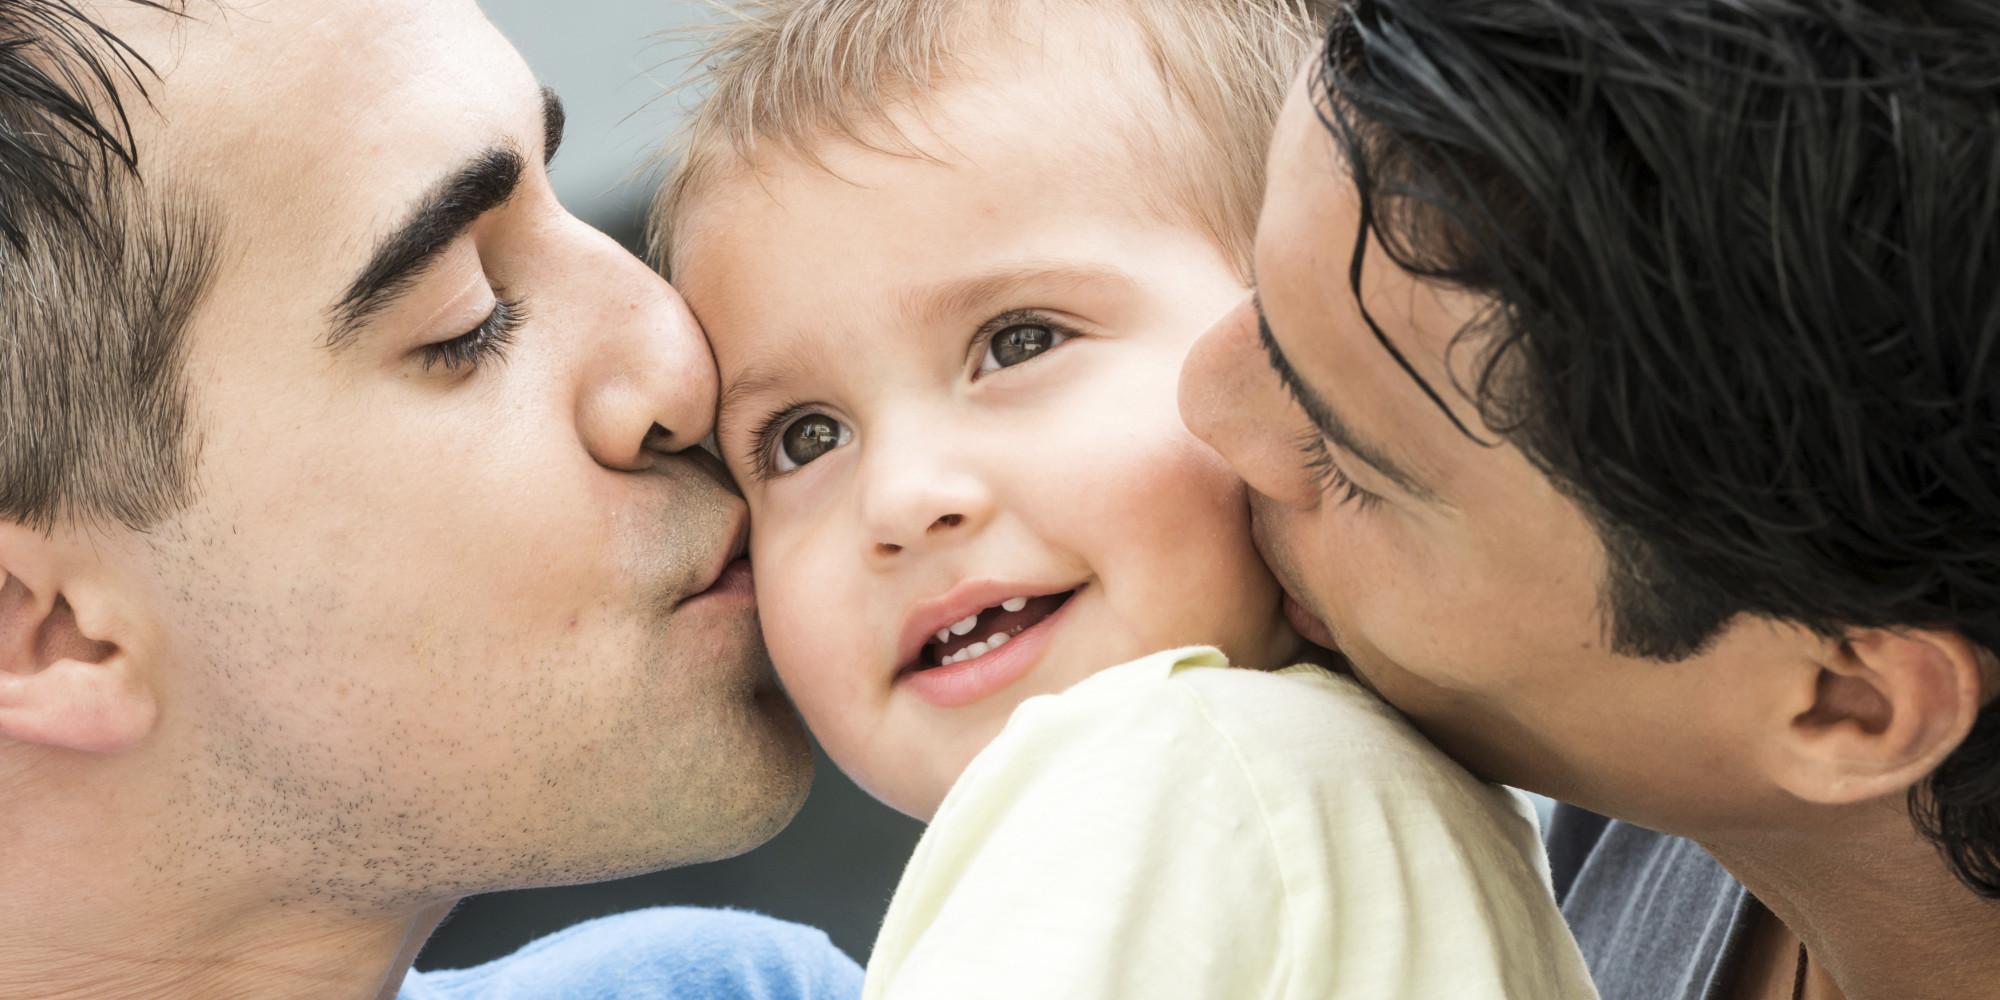 Gay adoption law due before same